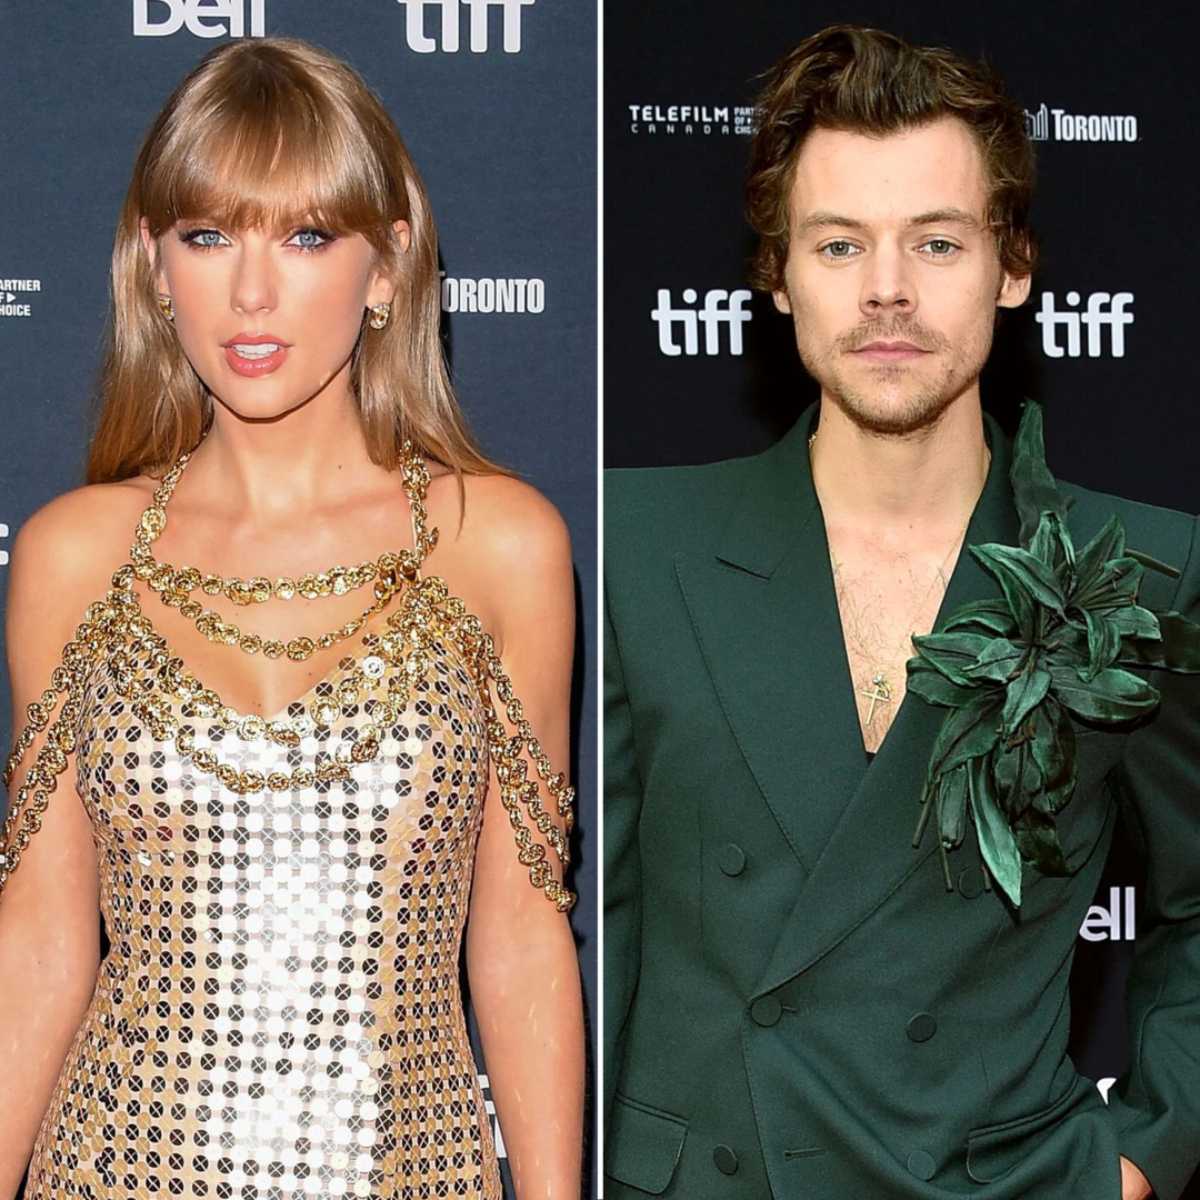 Flattering or Not, Harry Styles Gives Nod to Taylor Swift's Songwriting: 'At Least the Songs are Good'